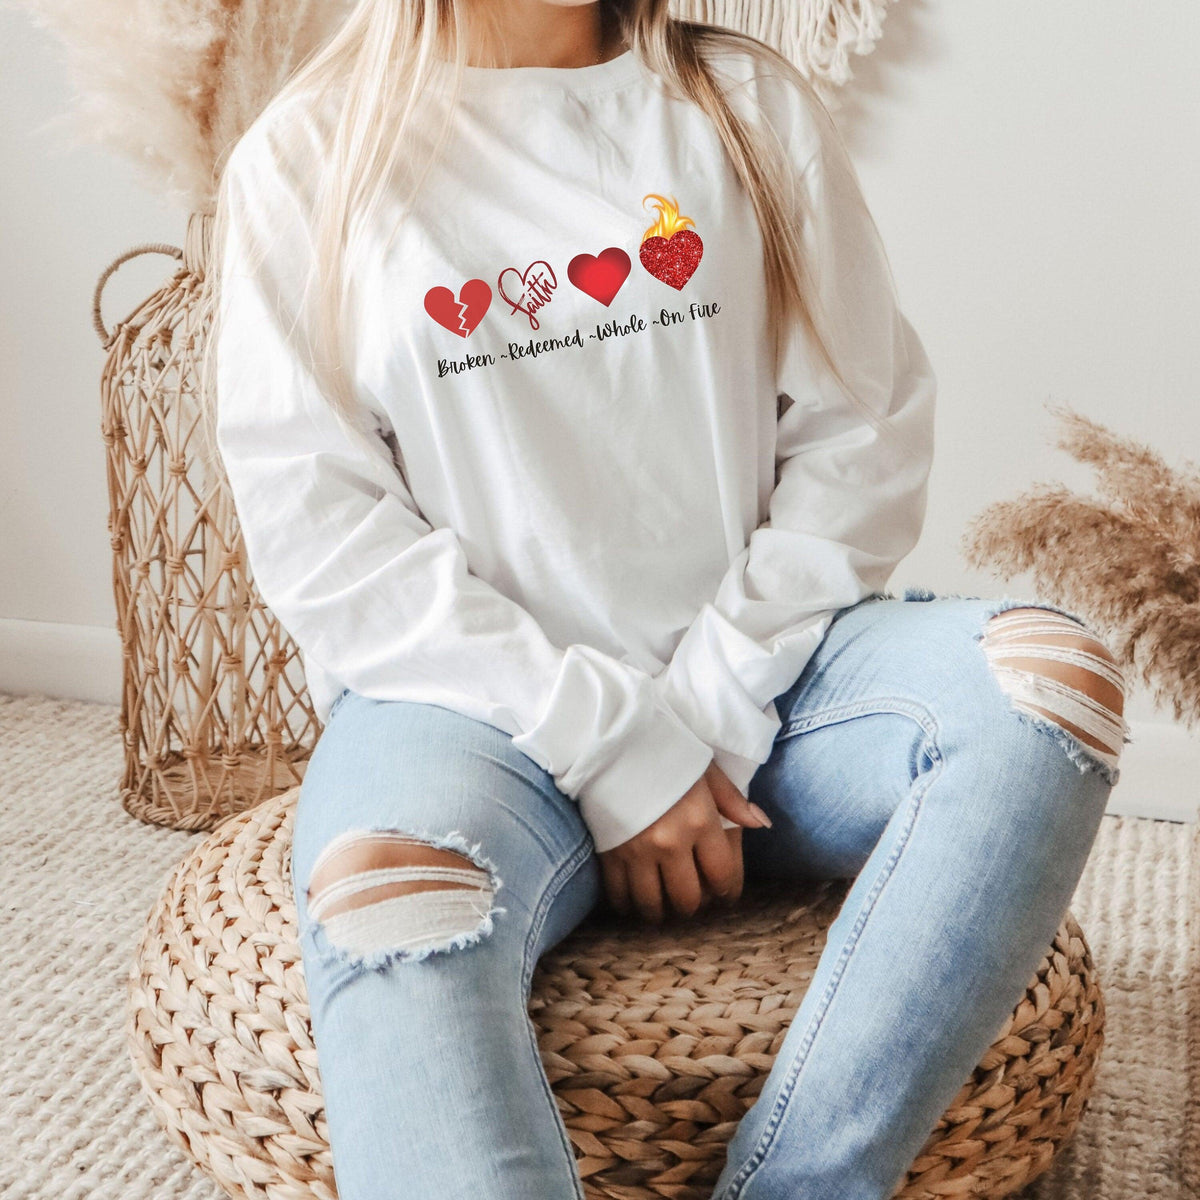 Christian Tee Shirt Mother&#39;s Day Gift Shirt Inspirational Quote T-Shirt Hearts on Fire Shirt Redeemed Whole Heart Long Sleeve Tee Cute Gift - The Ripple Effect Co.US